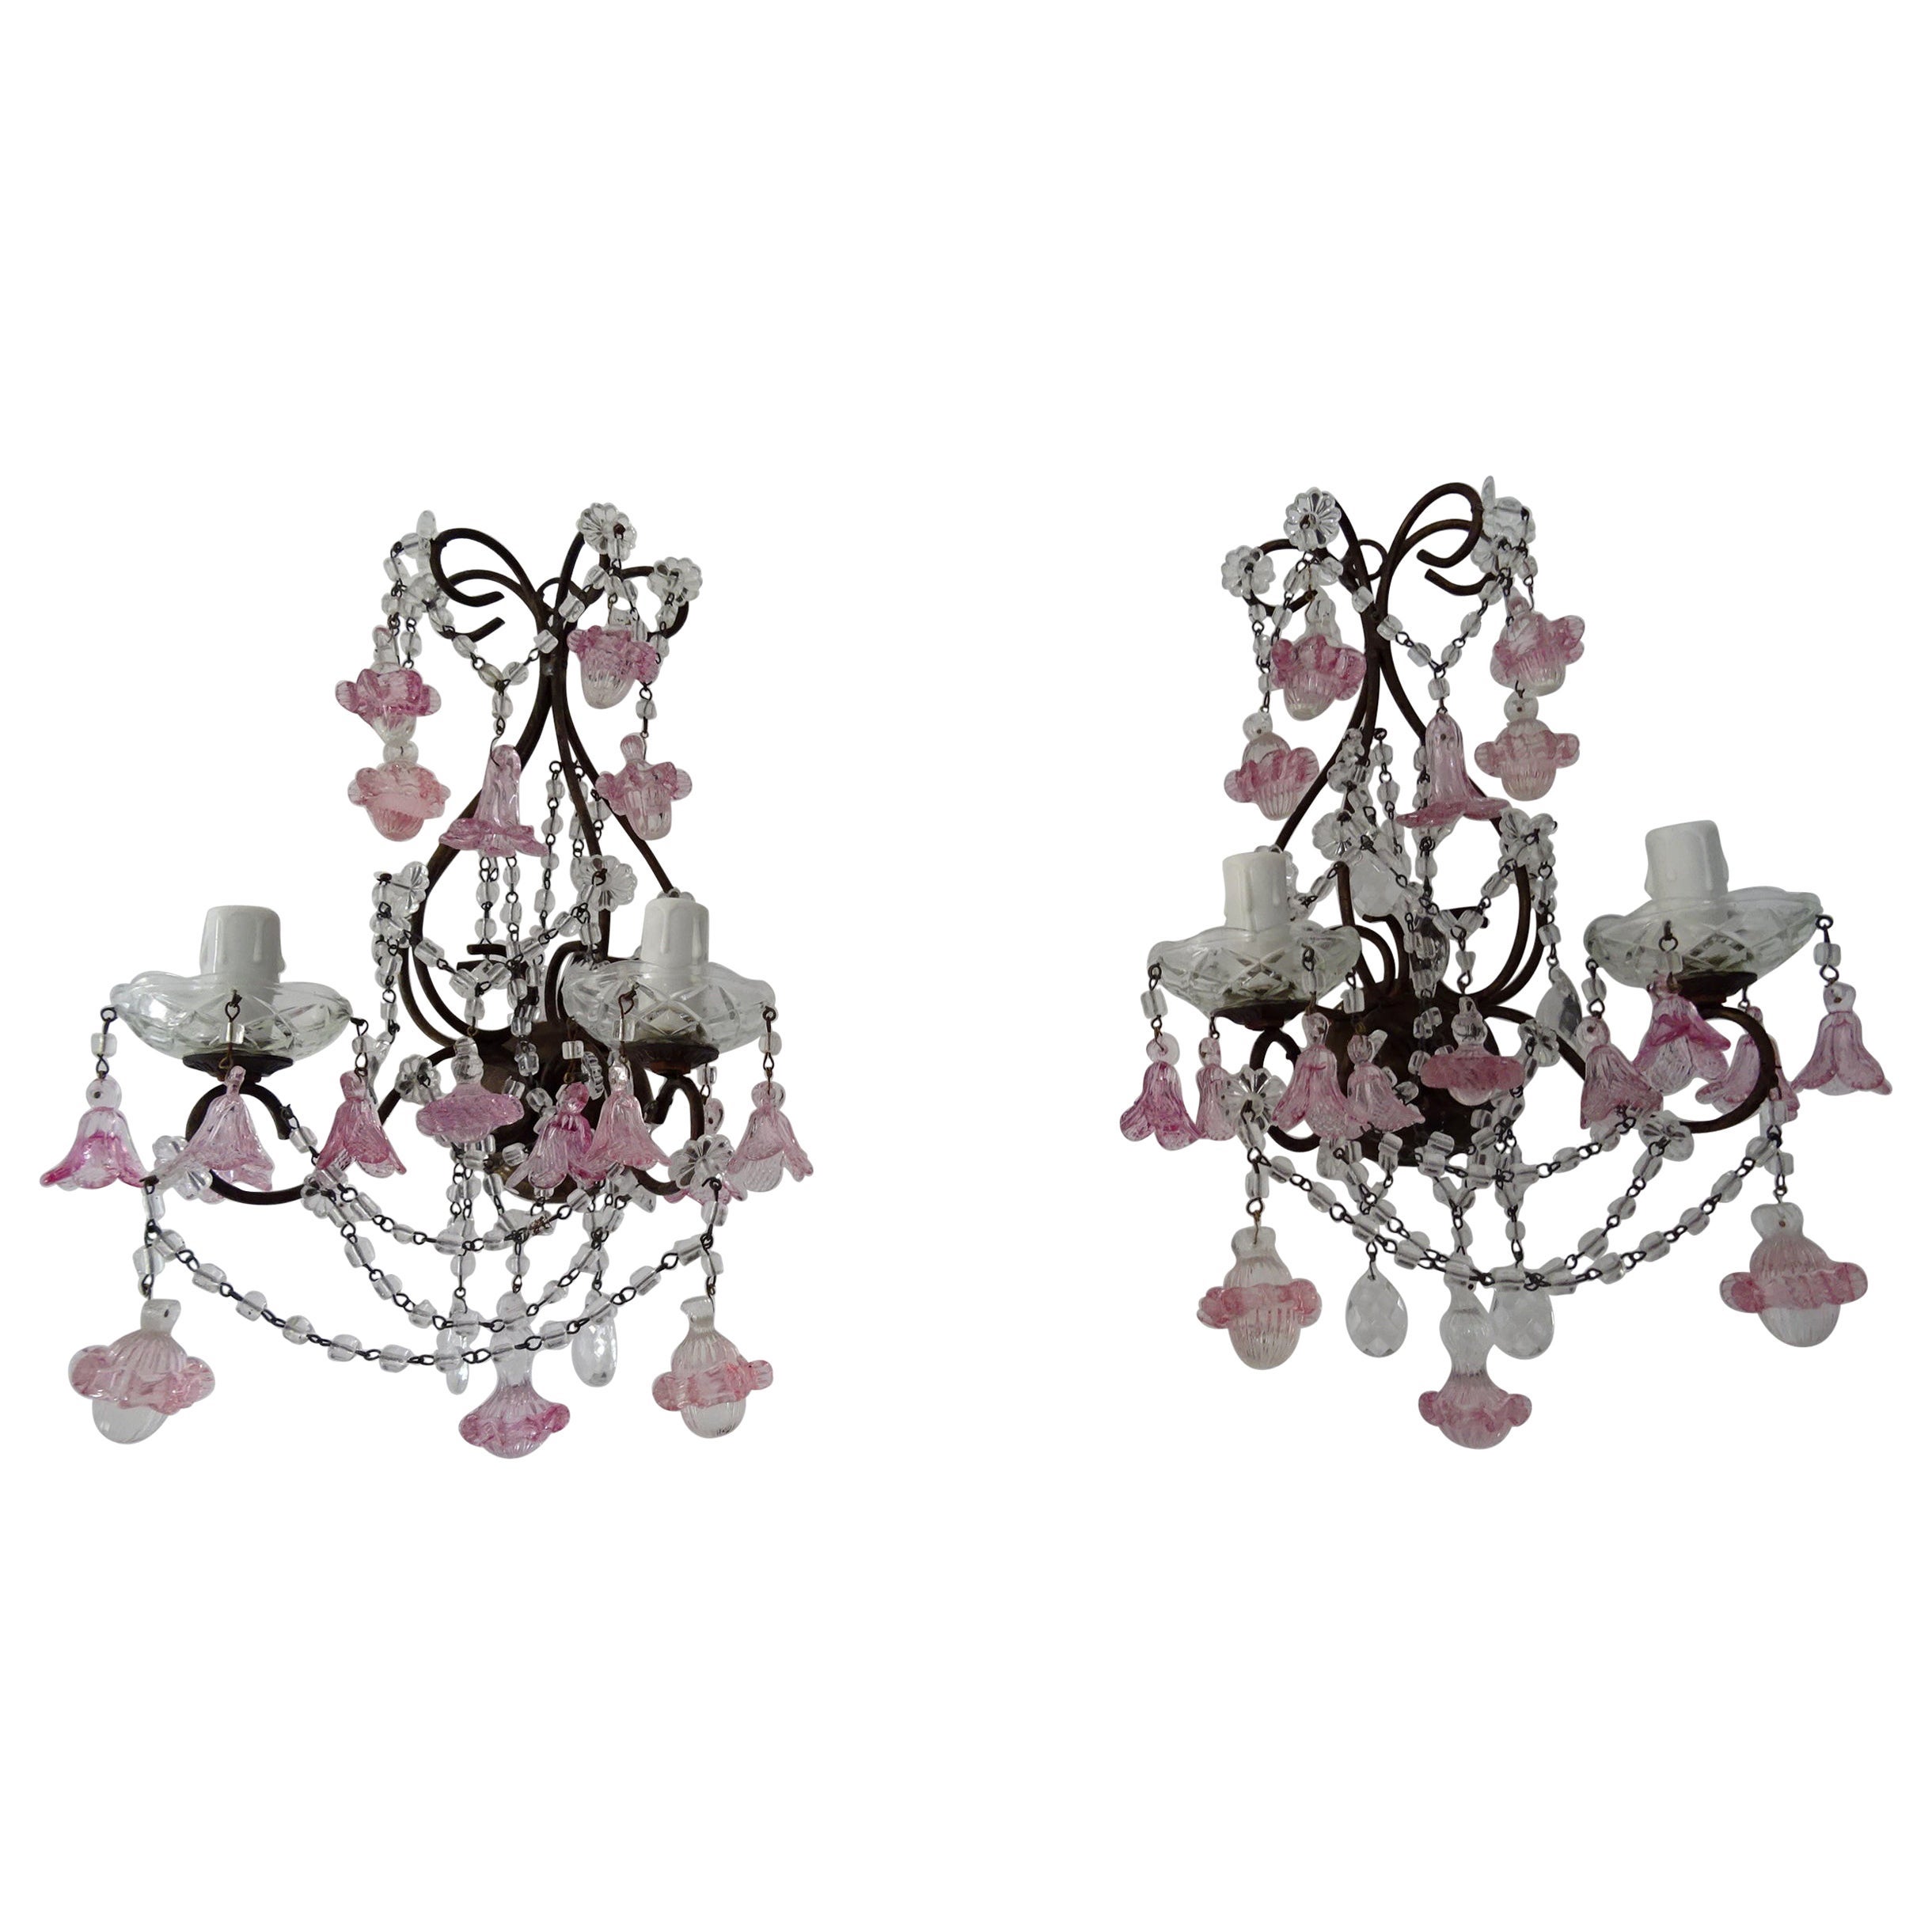 1920 French Pink Fuchsia Murano Balls & Ribbons Giltwood Crystal Prisms Sconces